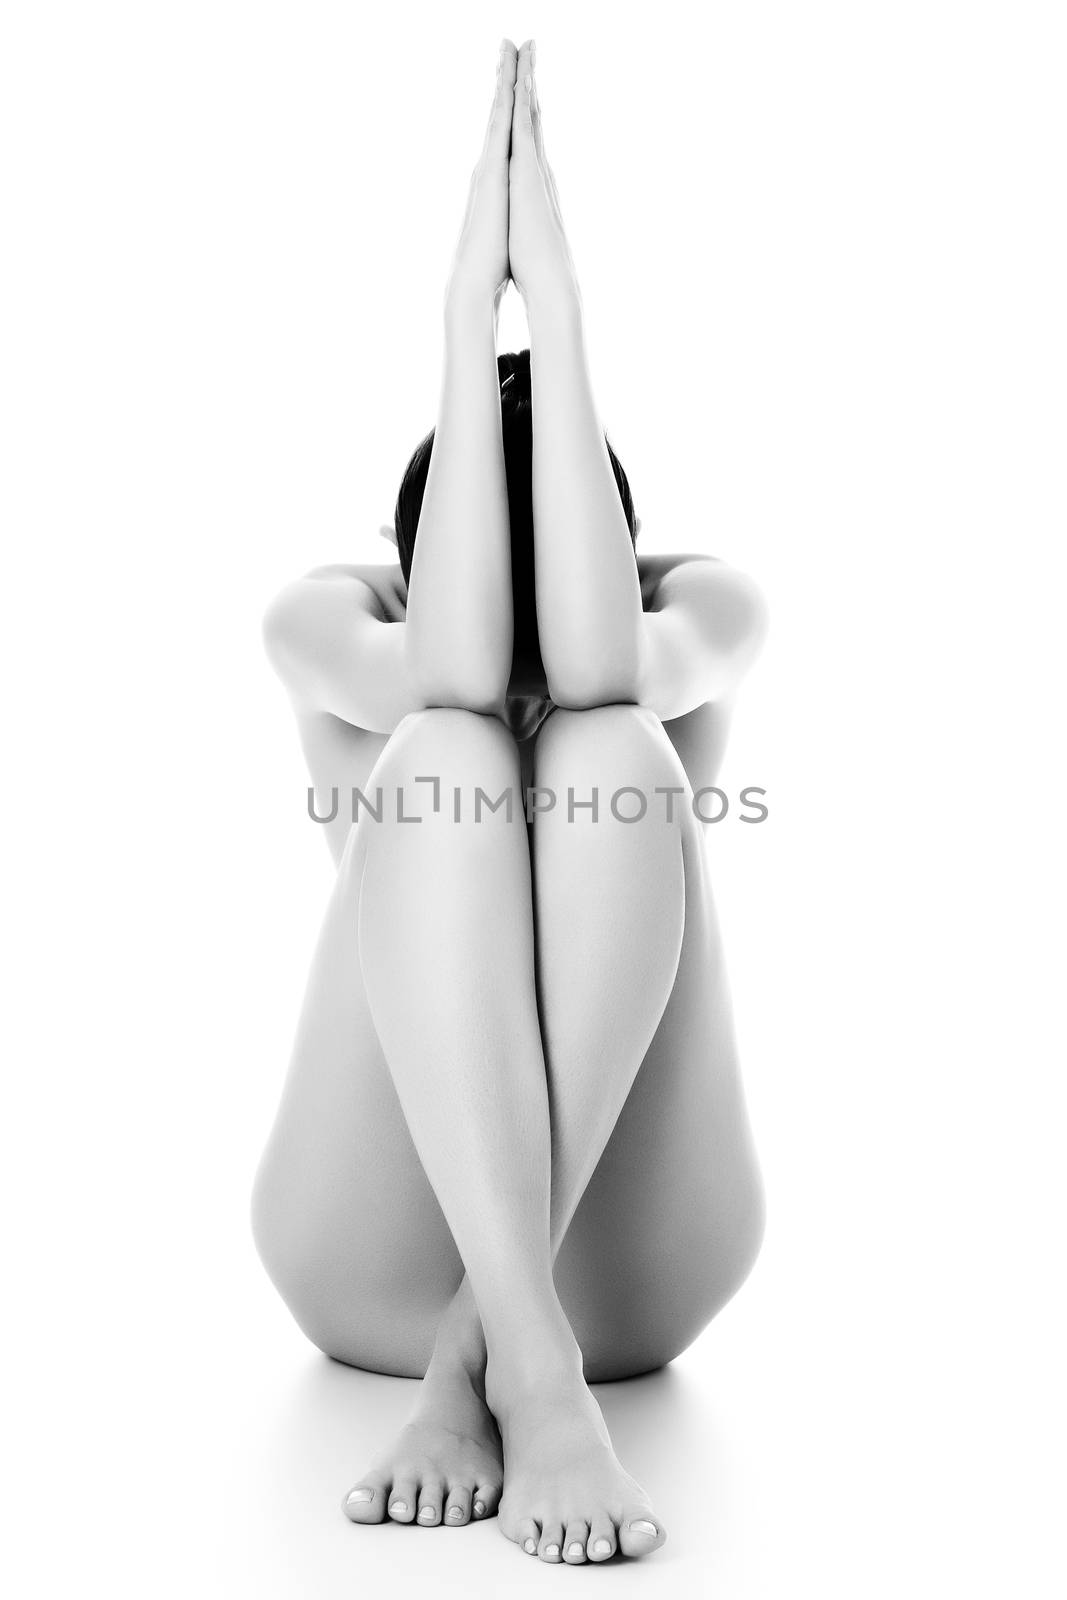 Naked woman on a white background